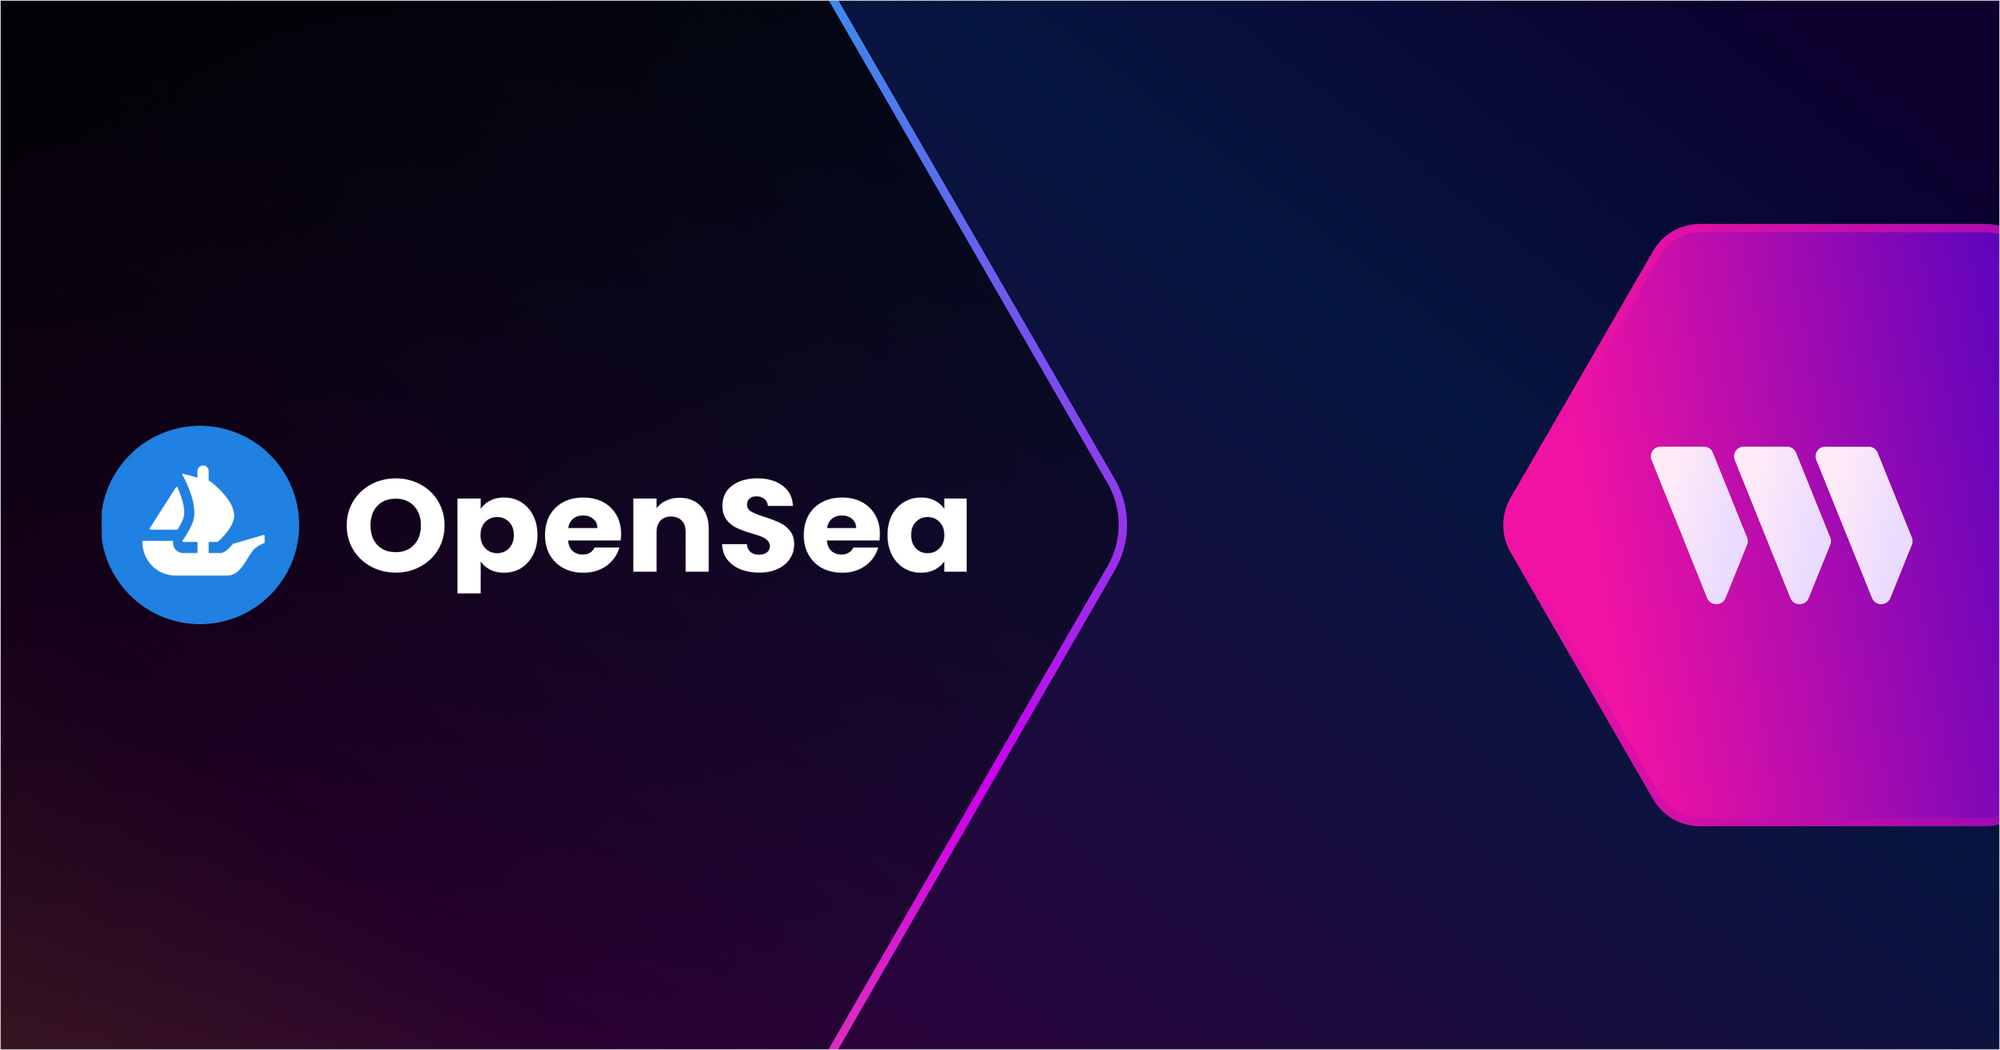 Introducing The New OpenSea Homepage